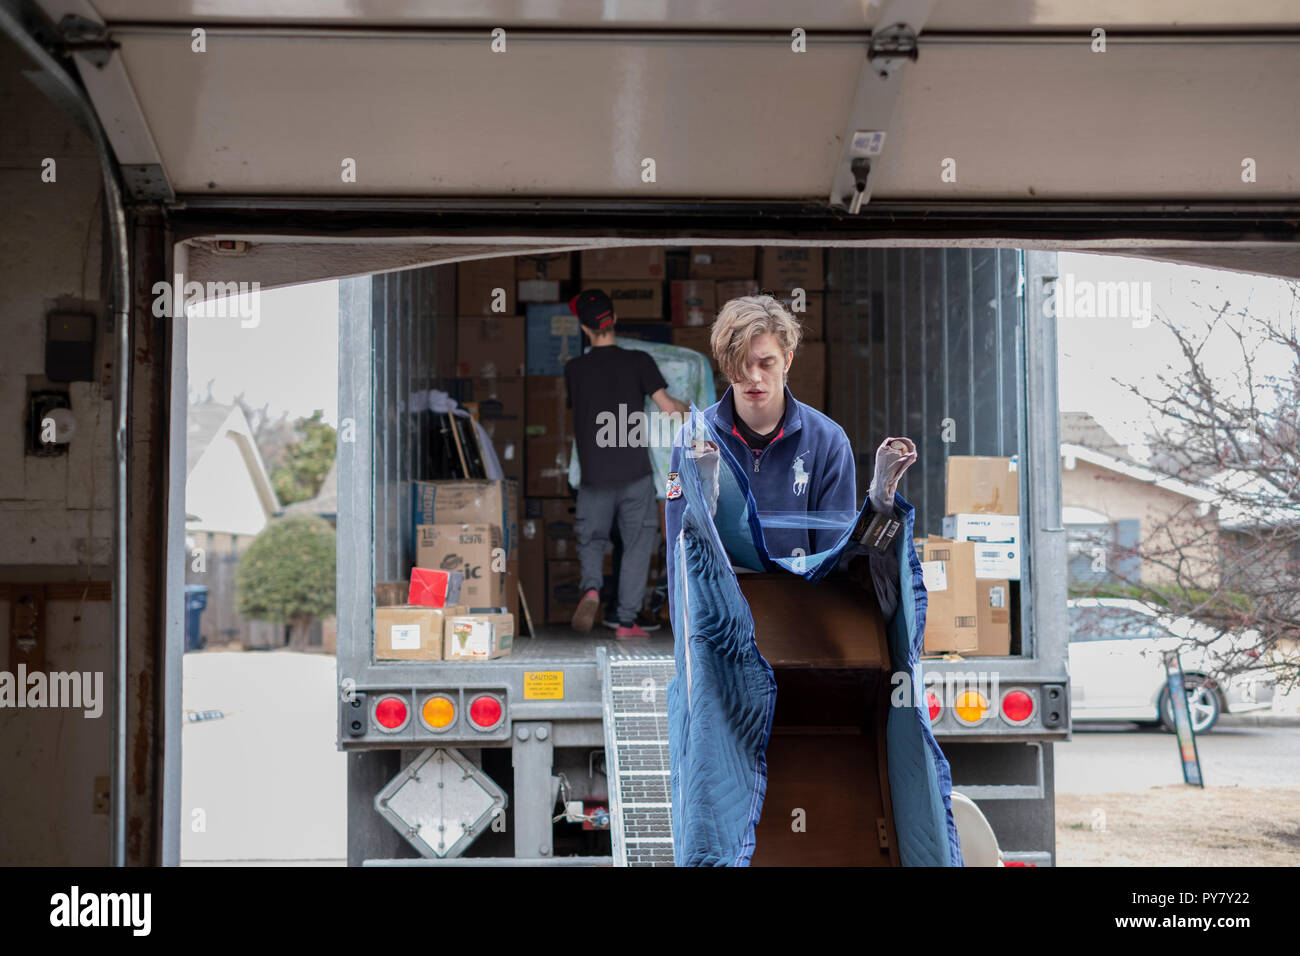 Two young Caucasian men employees of a moving company load furniture in moving van. Oklahoma City, Oklahoma, USA. Stock Photo